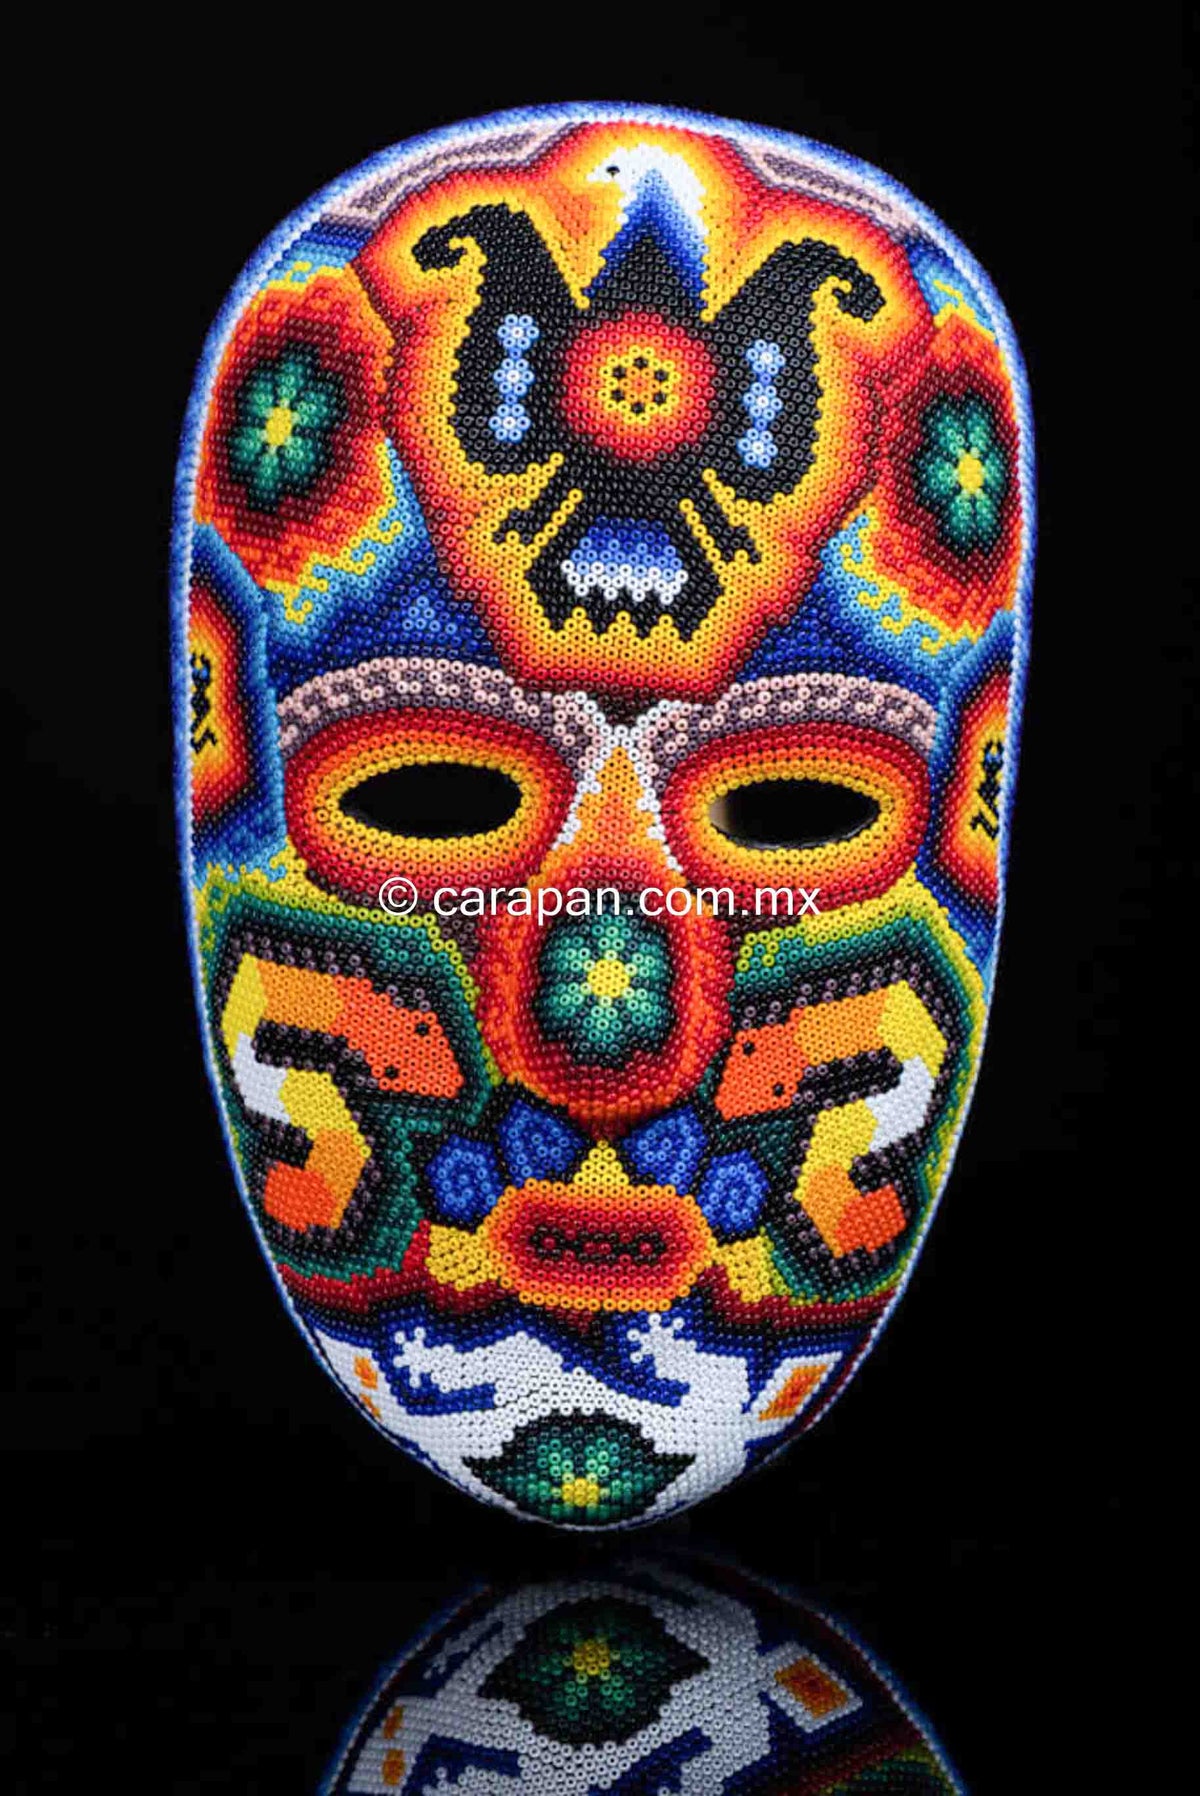 Mexican Huichol Beaded Mask with Eeagle, Snakes & Sacred Symbols